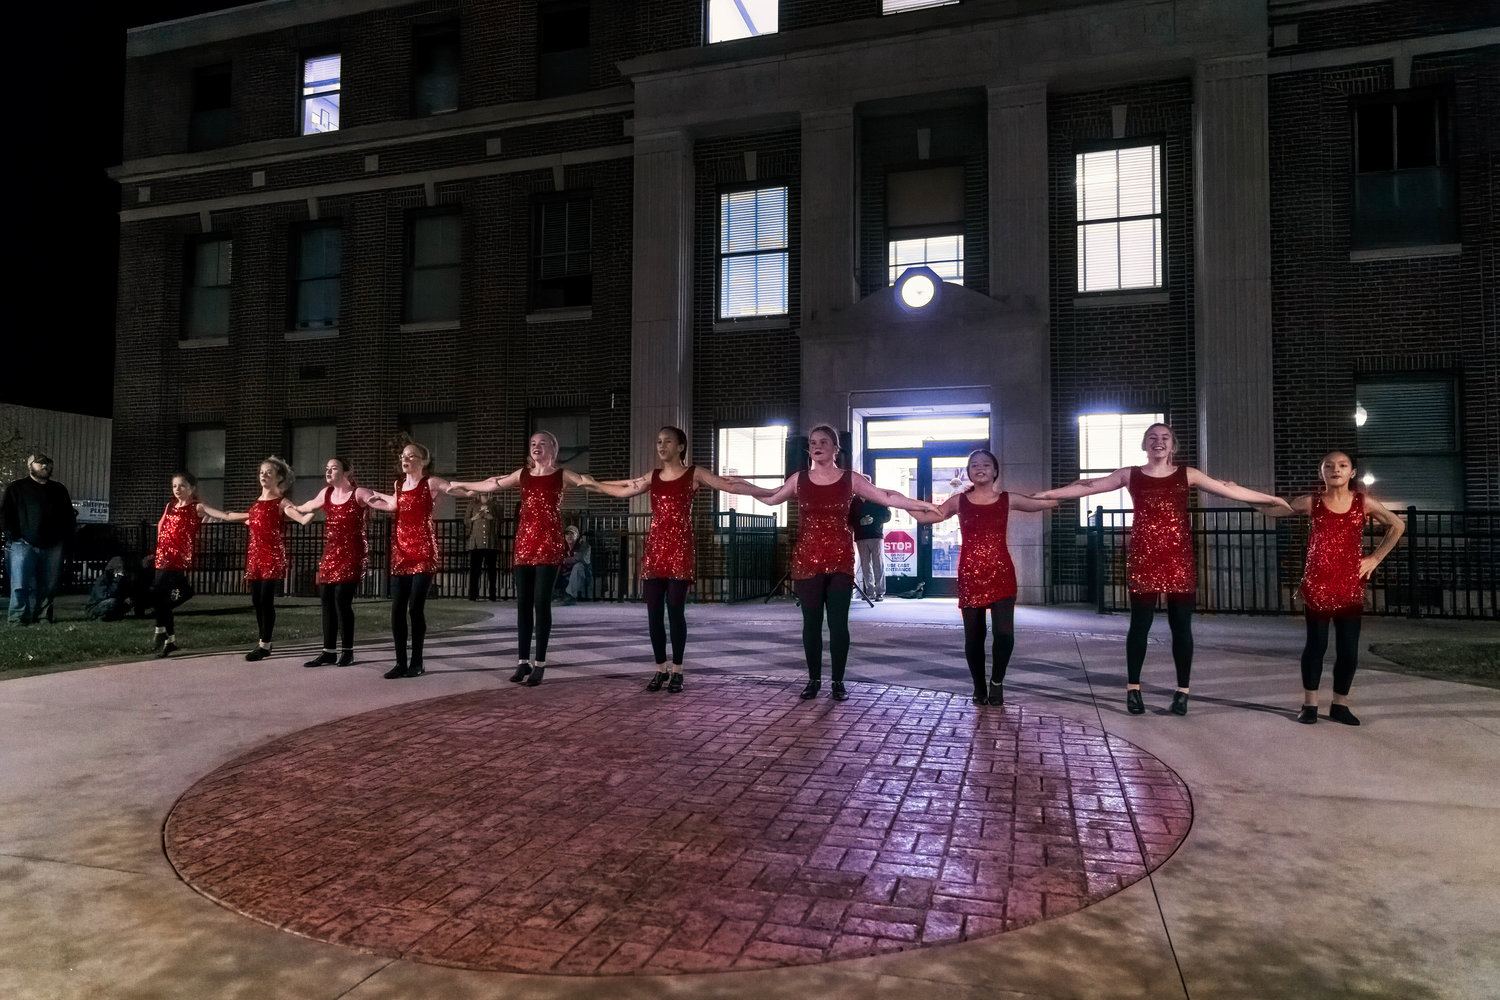 Janet’s Dance Studio dancers give a holiday performance during the lighting ceremony.